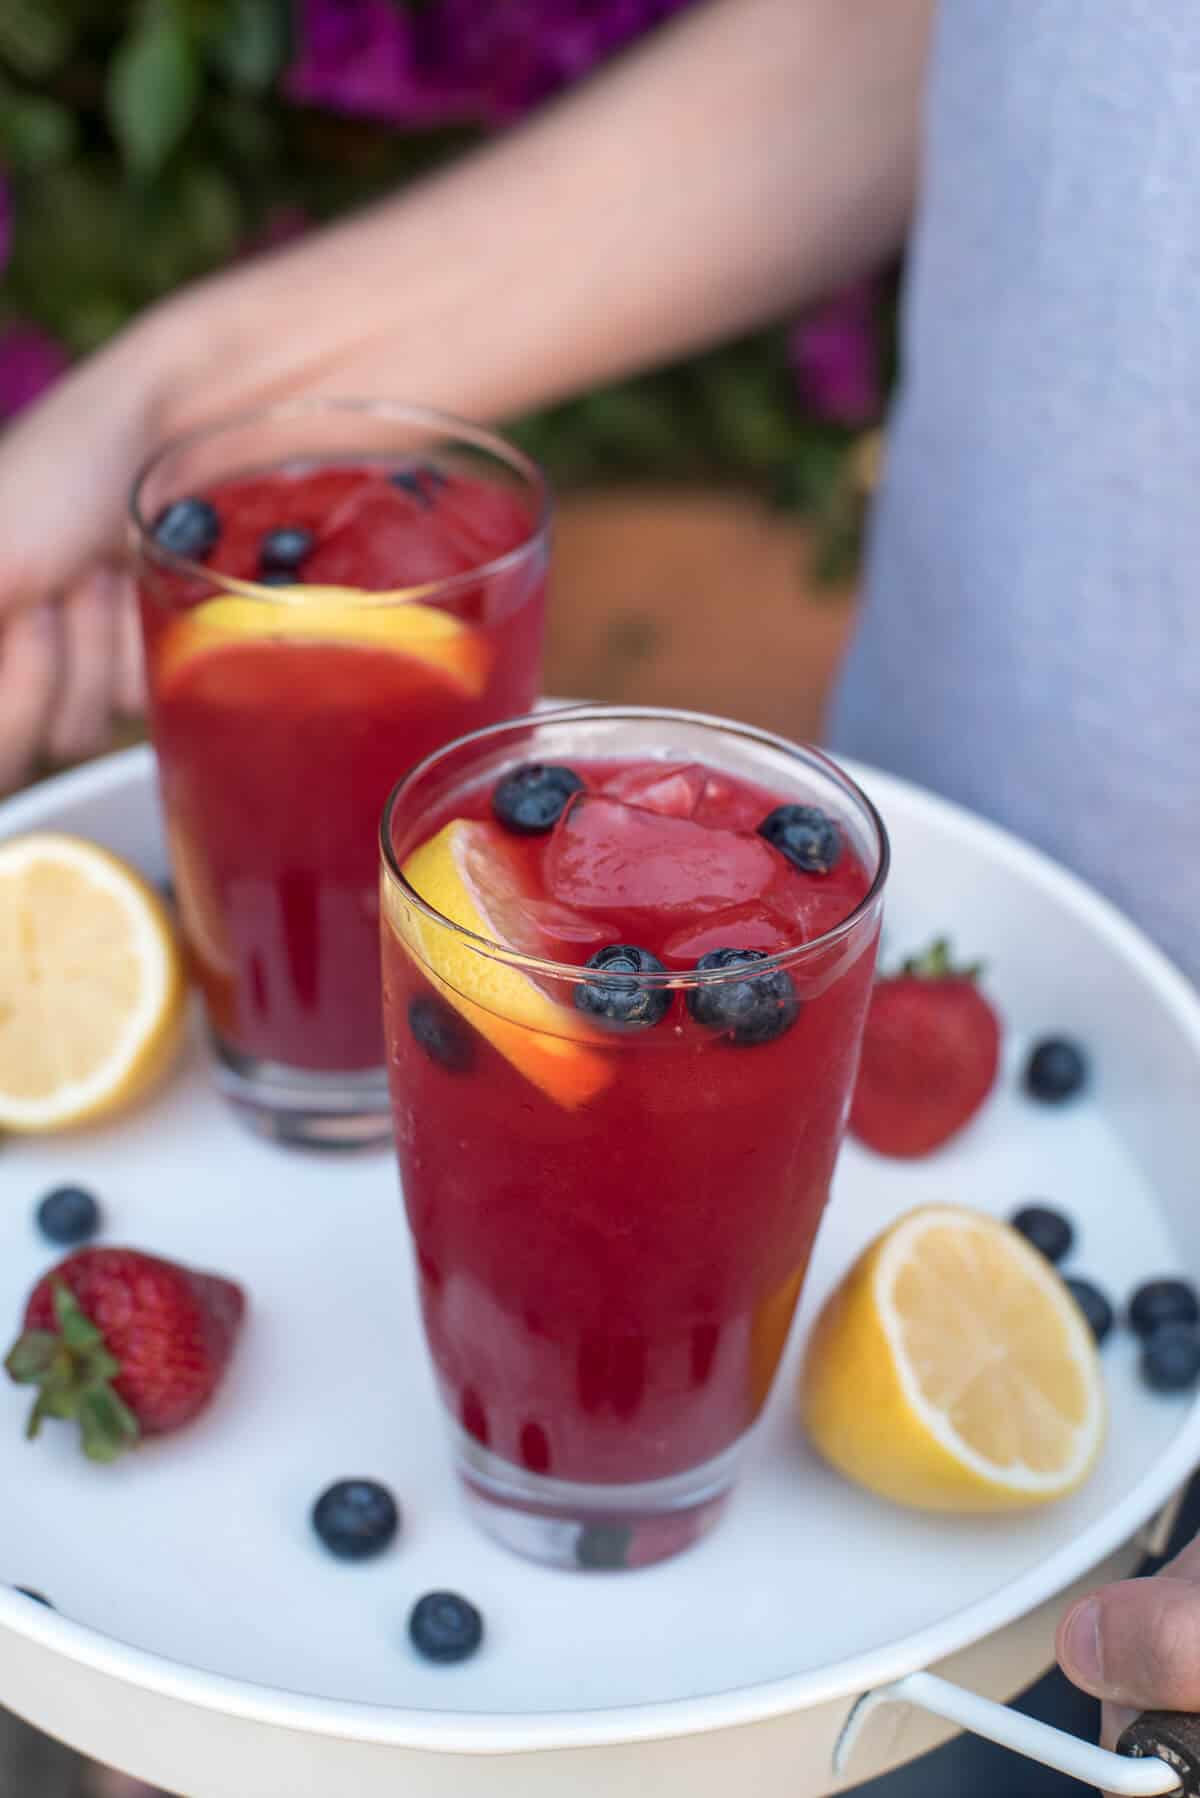 Hands holding a white tray with two glasses of Berry Lemonade.